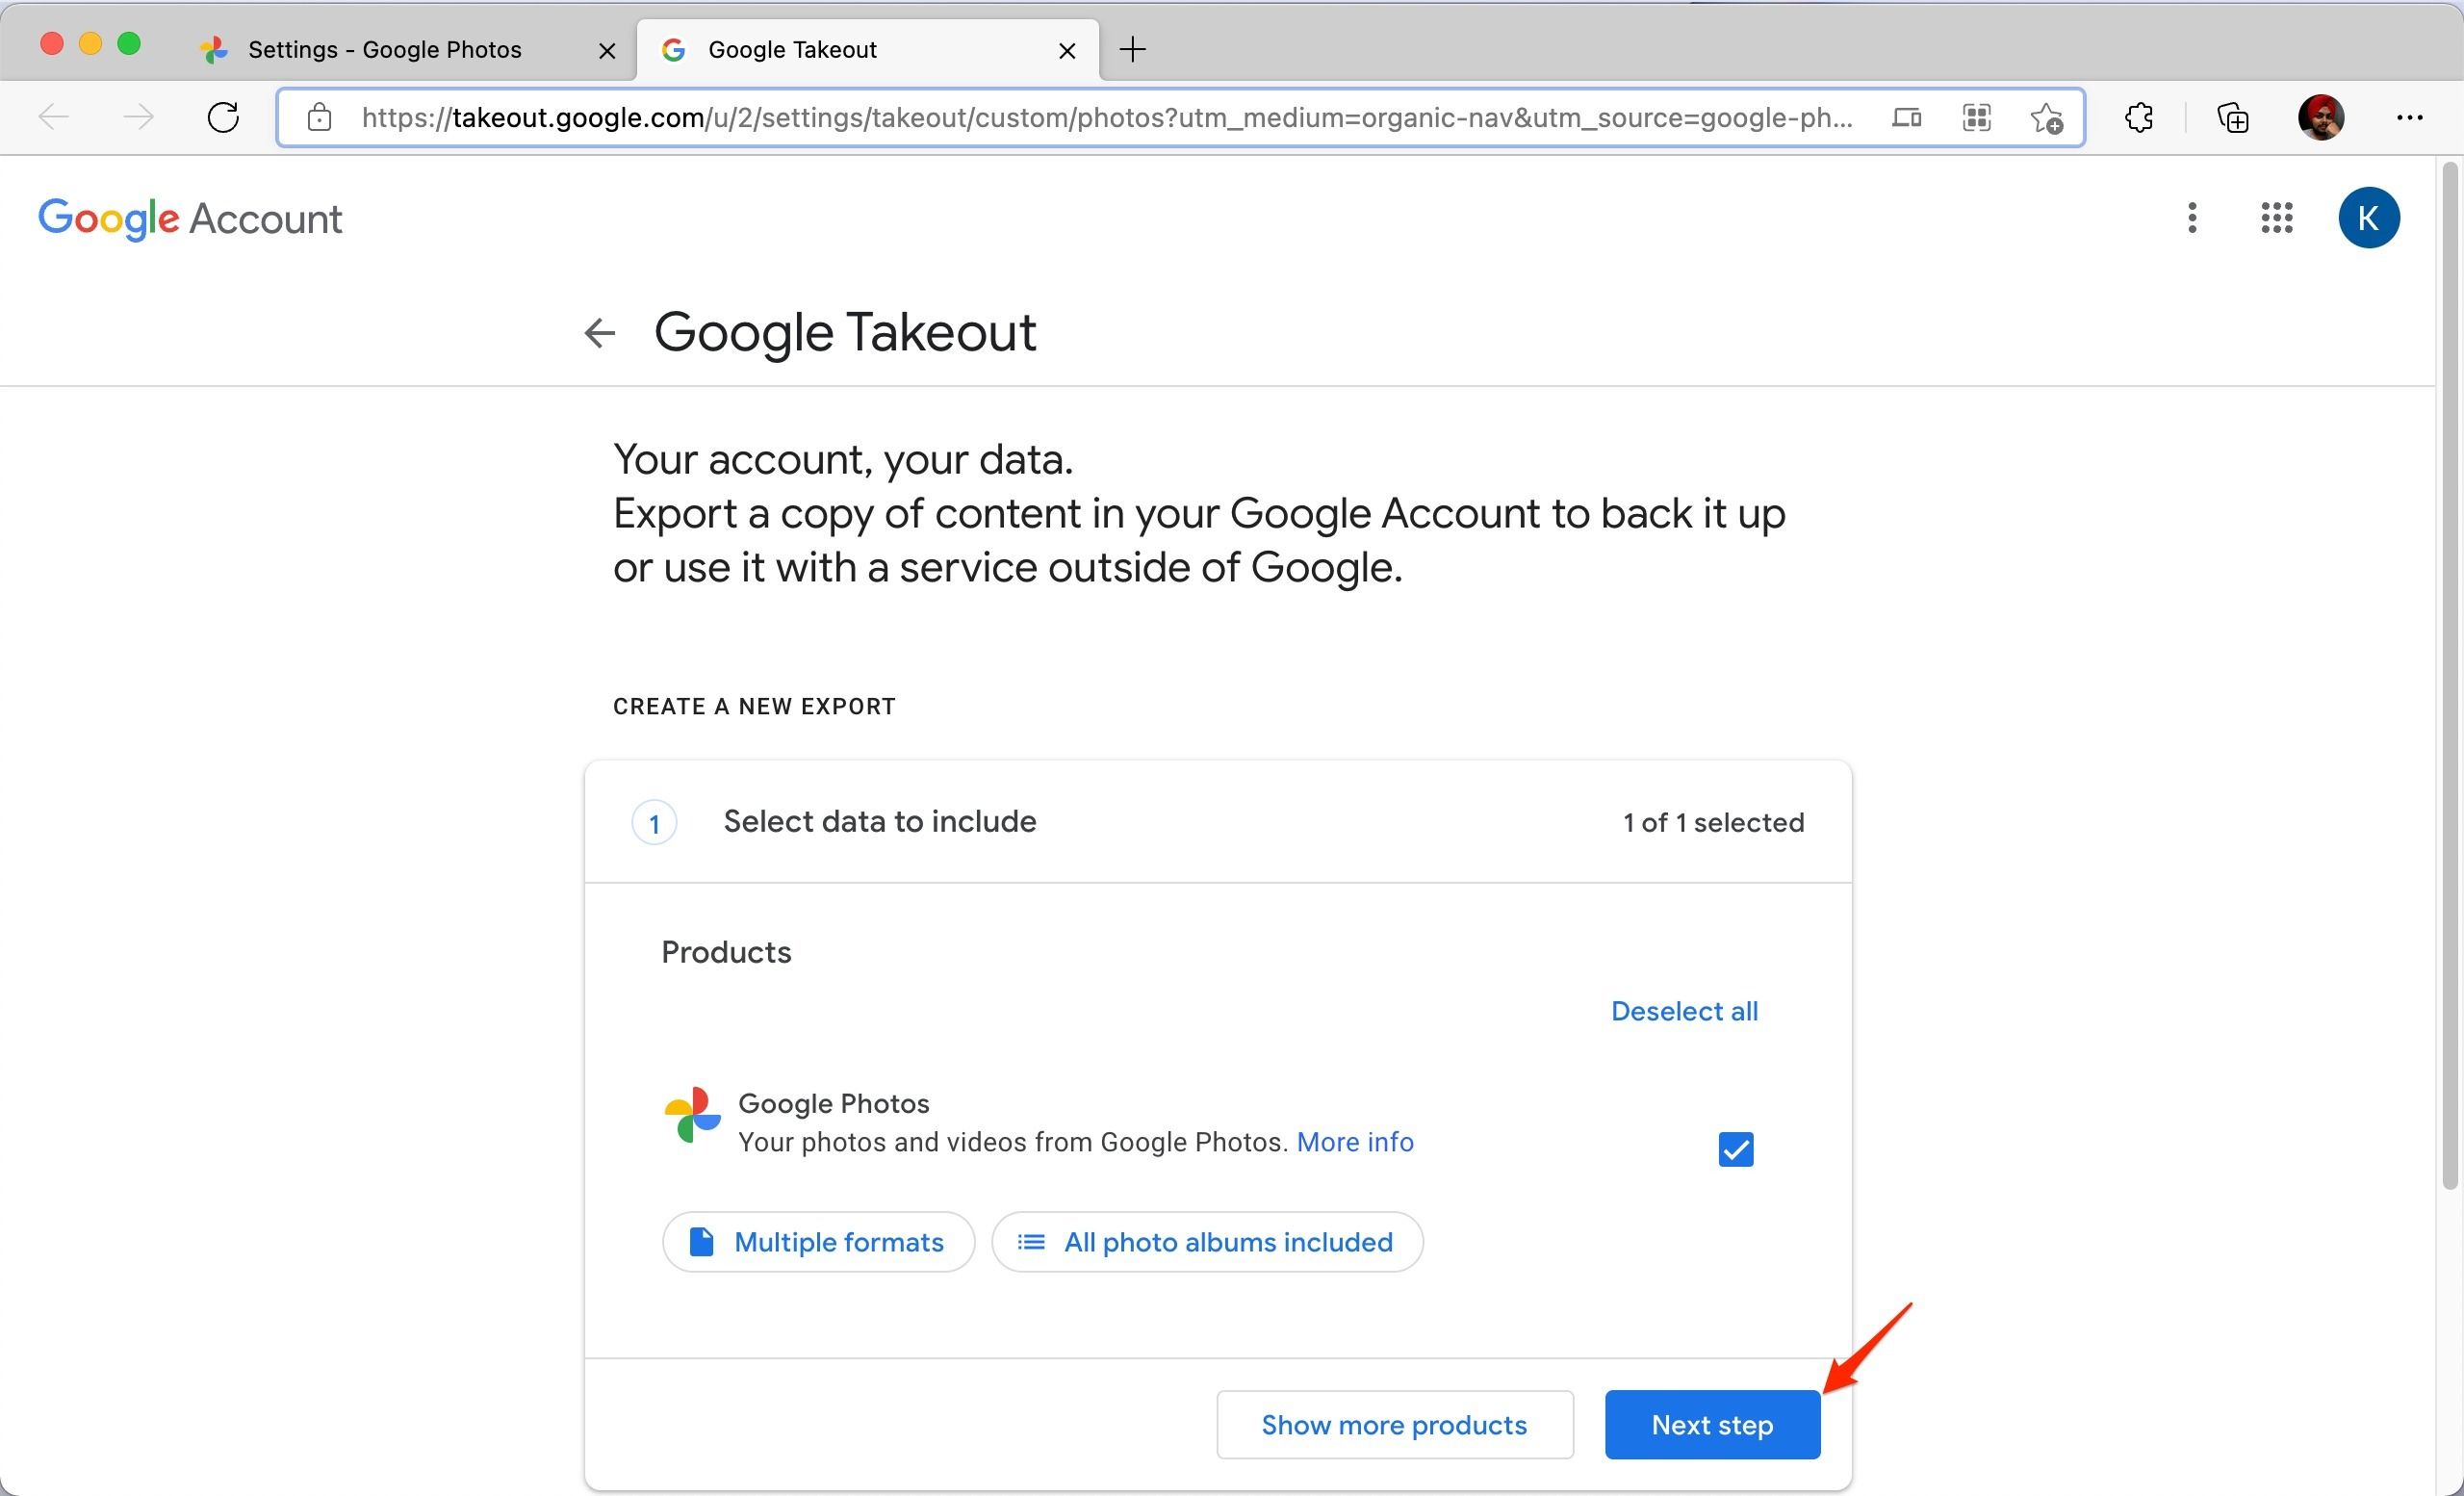 Google Photos Takeout page